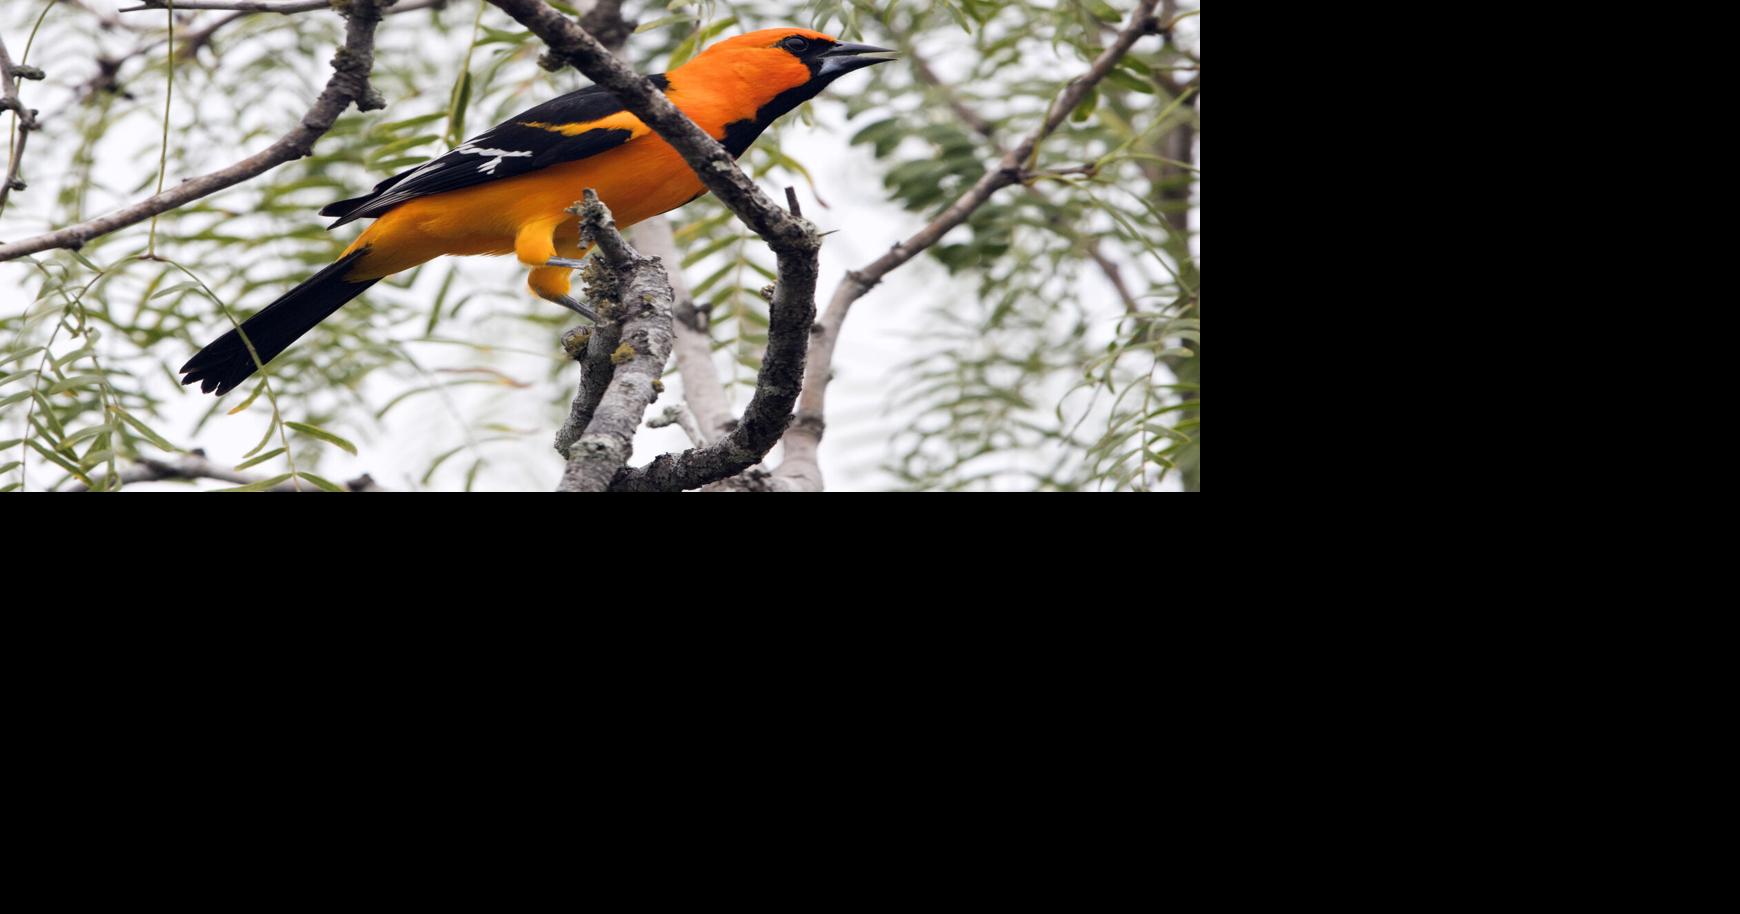 Colorful Baltimore orioles are back in Texas